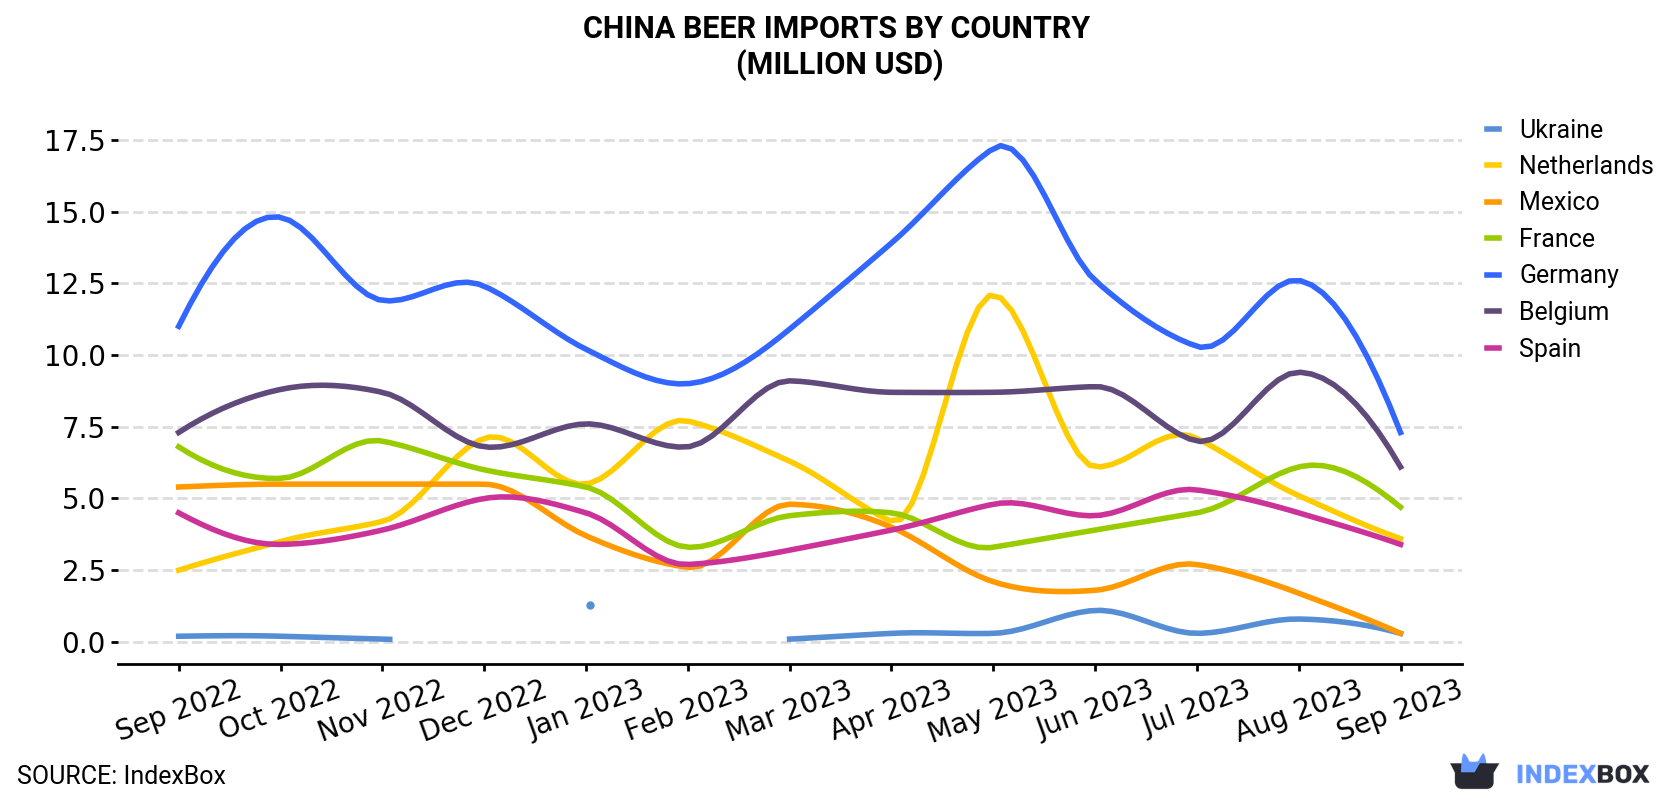 China Beer Imports By Country (Million USD)